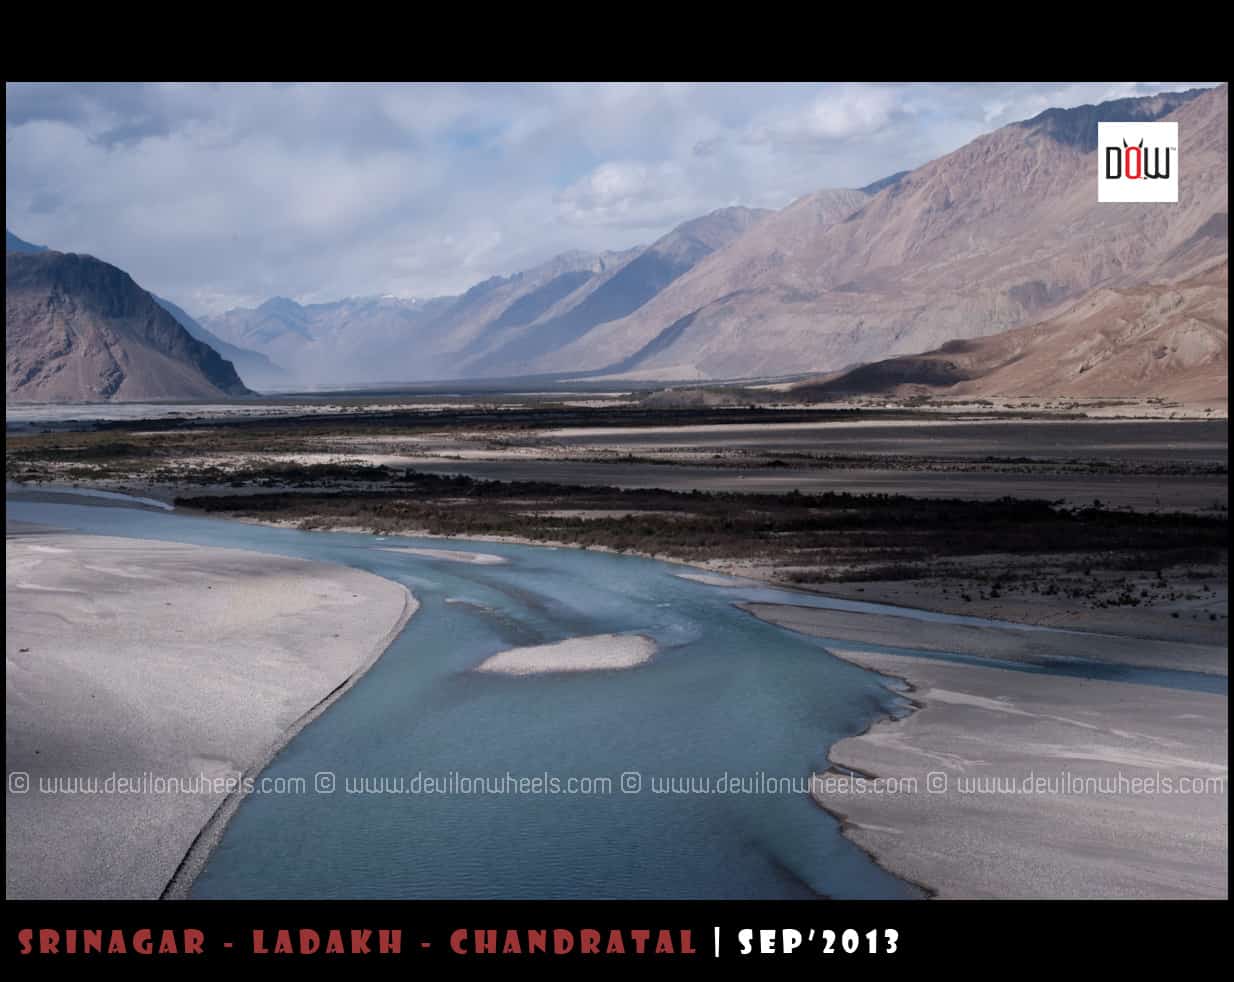 Shyok River and widening views of Nubra Valley